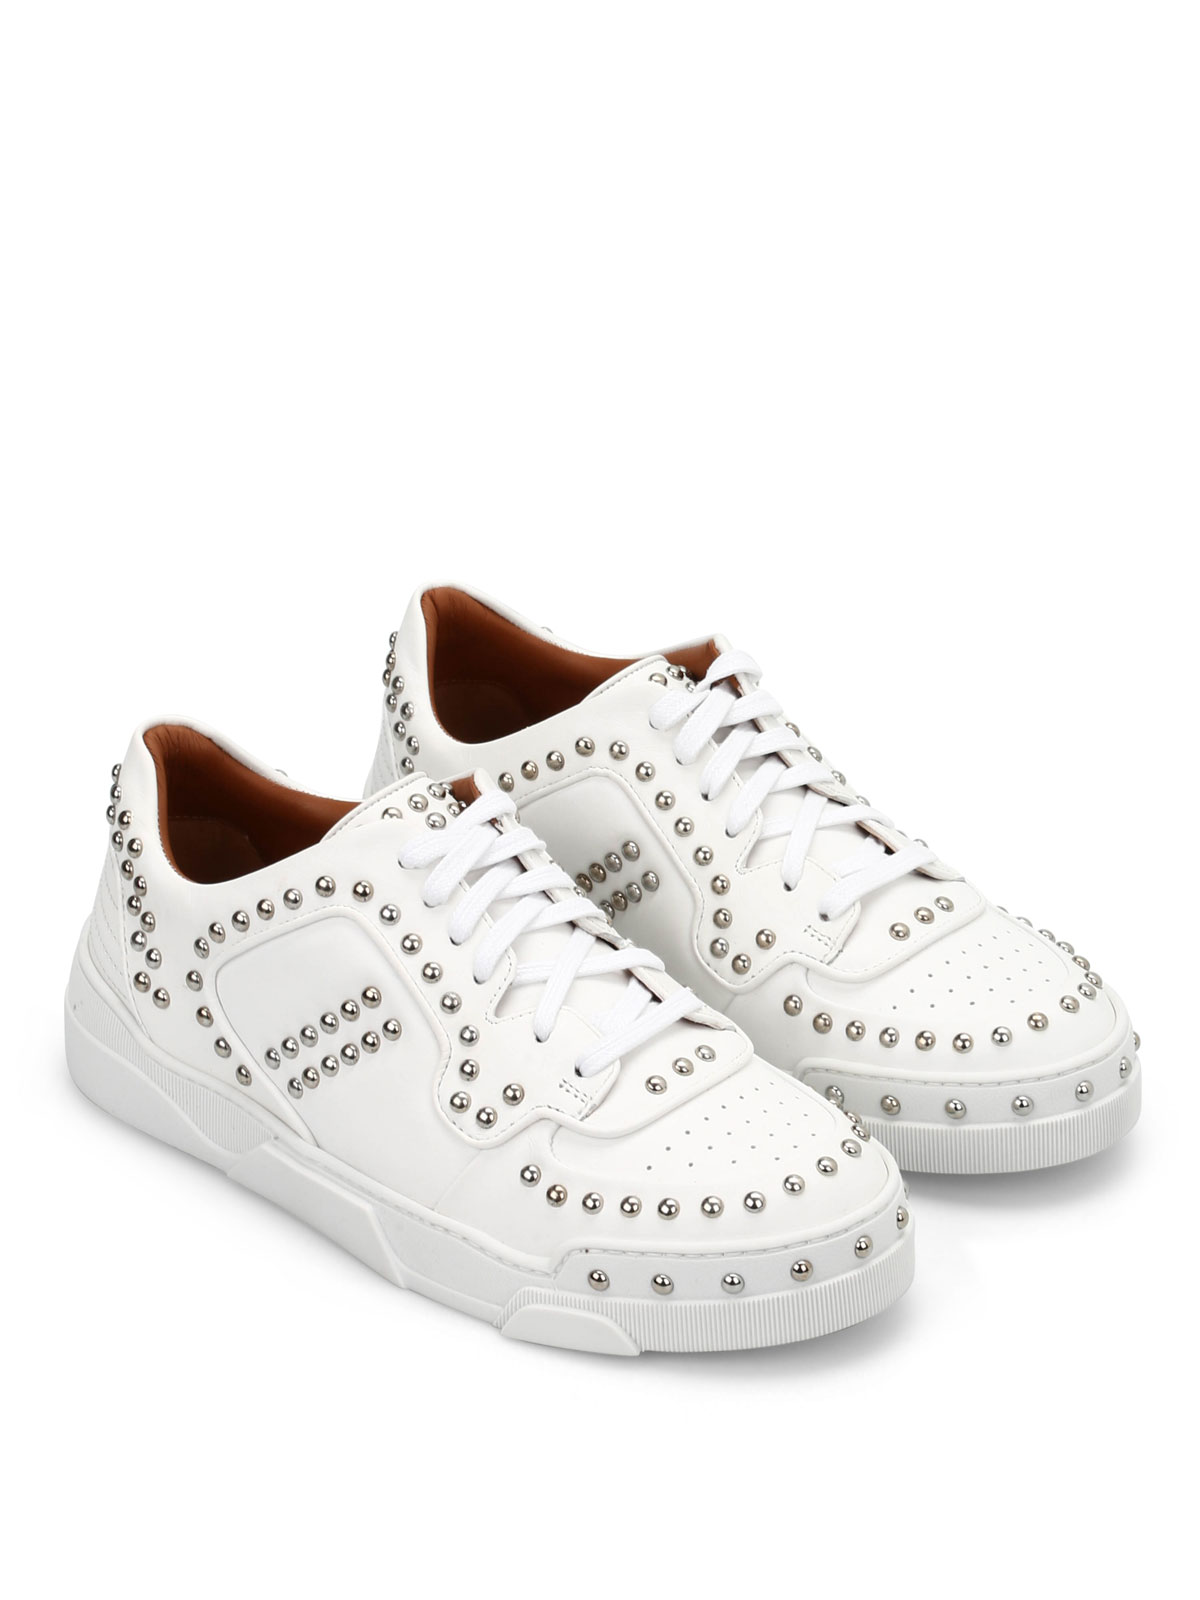 Givenchy - Tyson II studded sneakers - trainers - BE087571581001200 x 1600